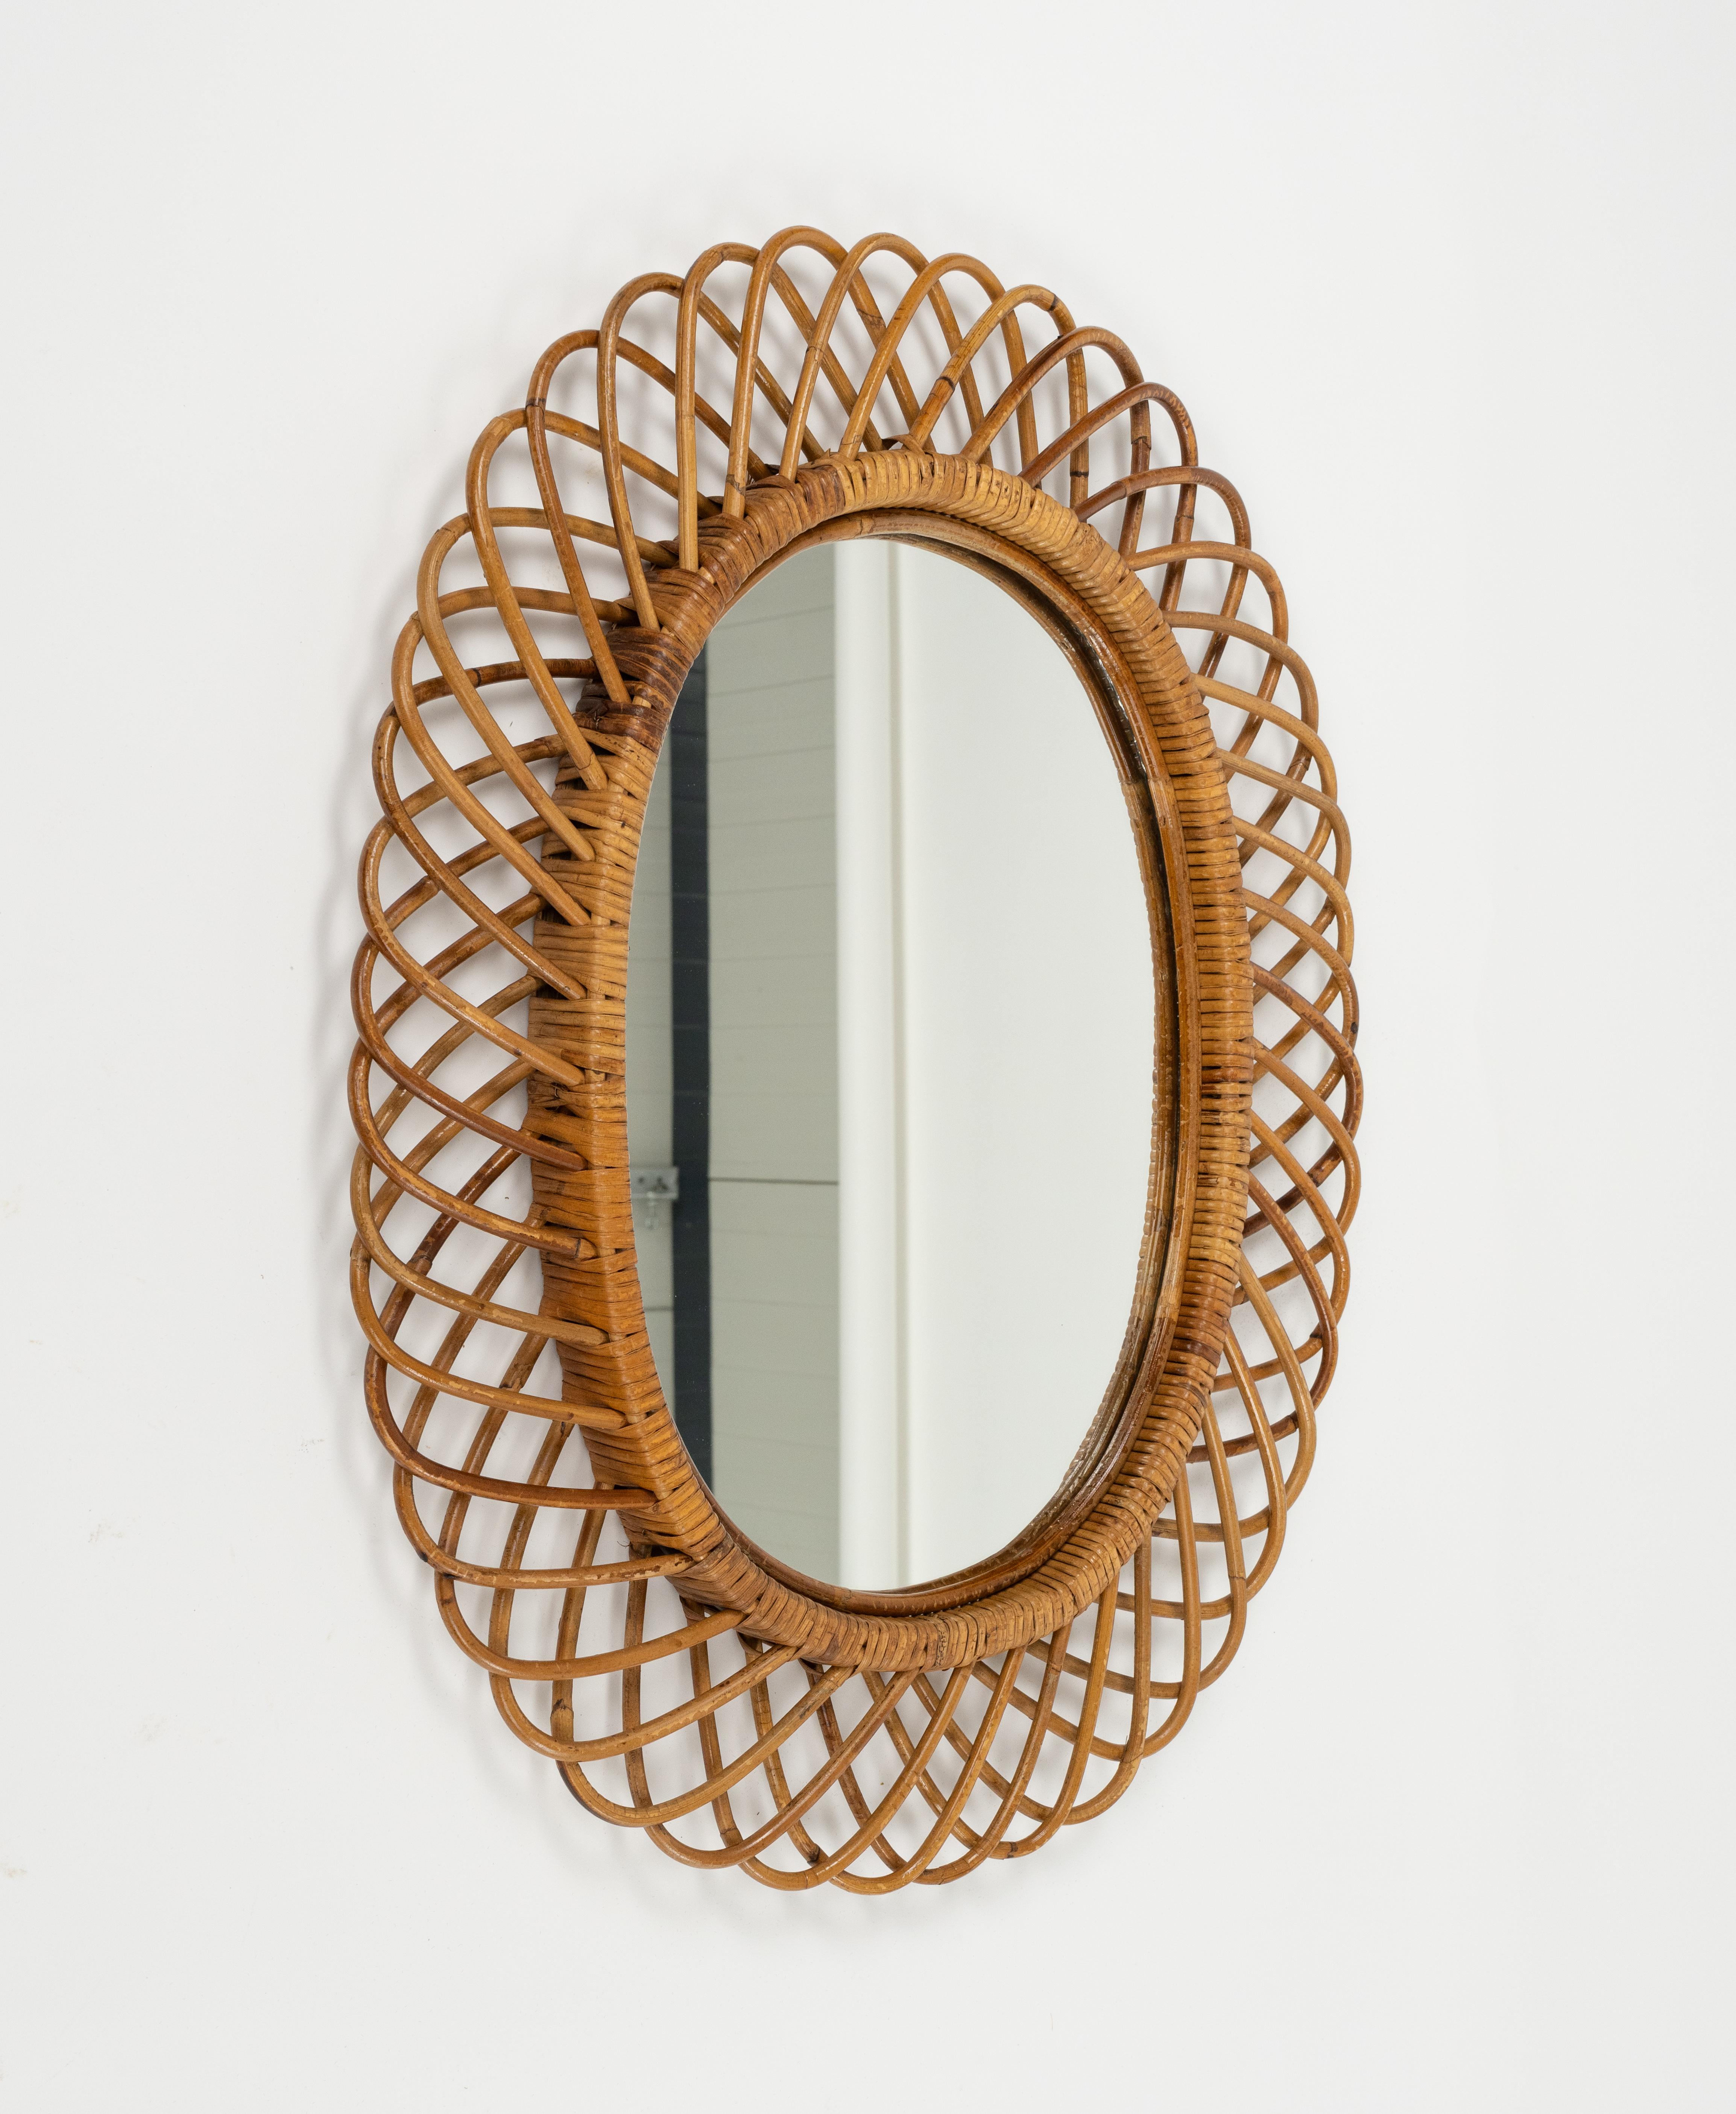 Midcentury Rattan and Bamboo Oval Wall Mirror by Franco Albini, Italy 1960s For Sale 3